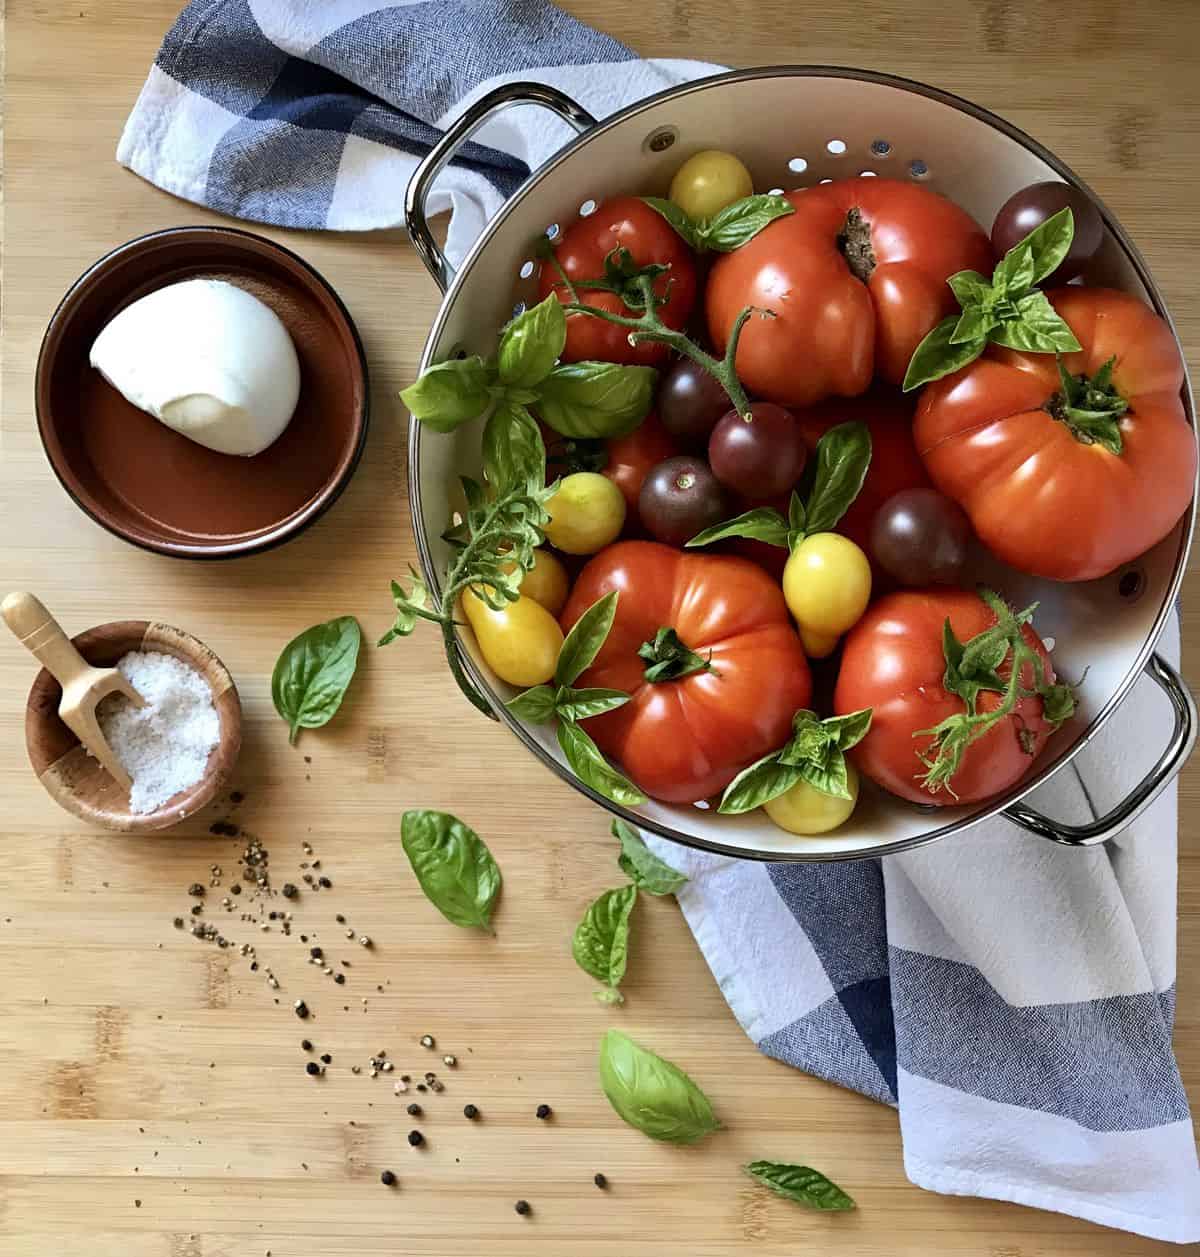 A colander filled with heirloom tomatoes, next to basil leaves, a ball of mozzarella, sea salt and pepper.